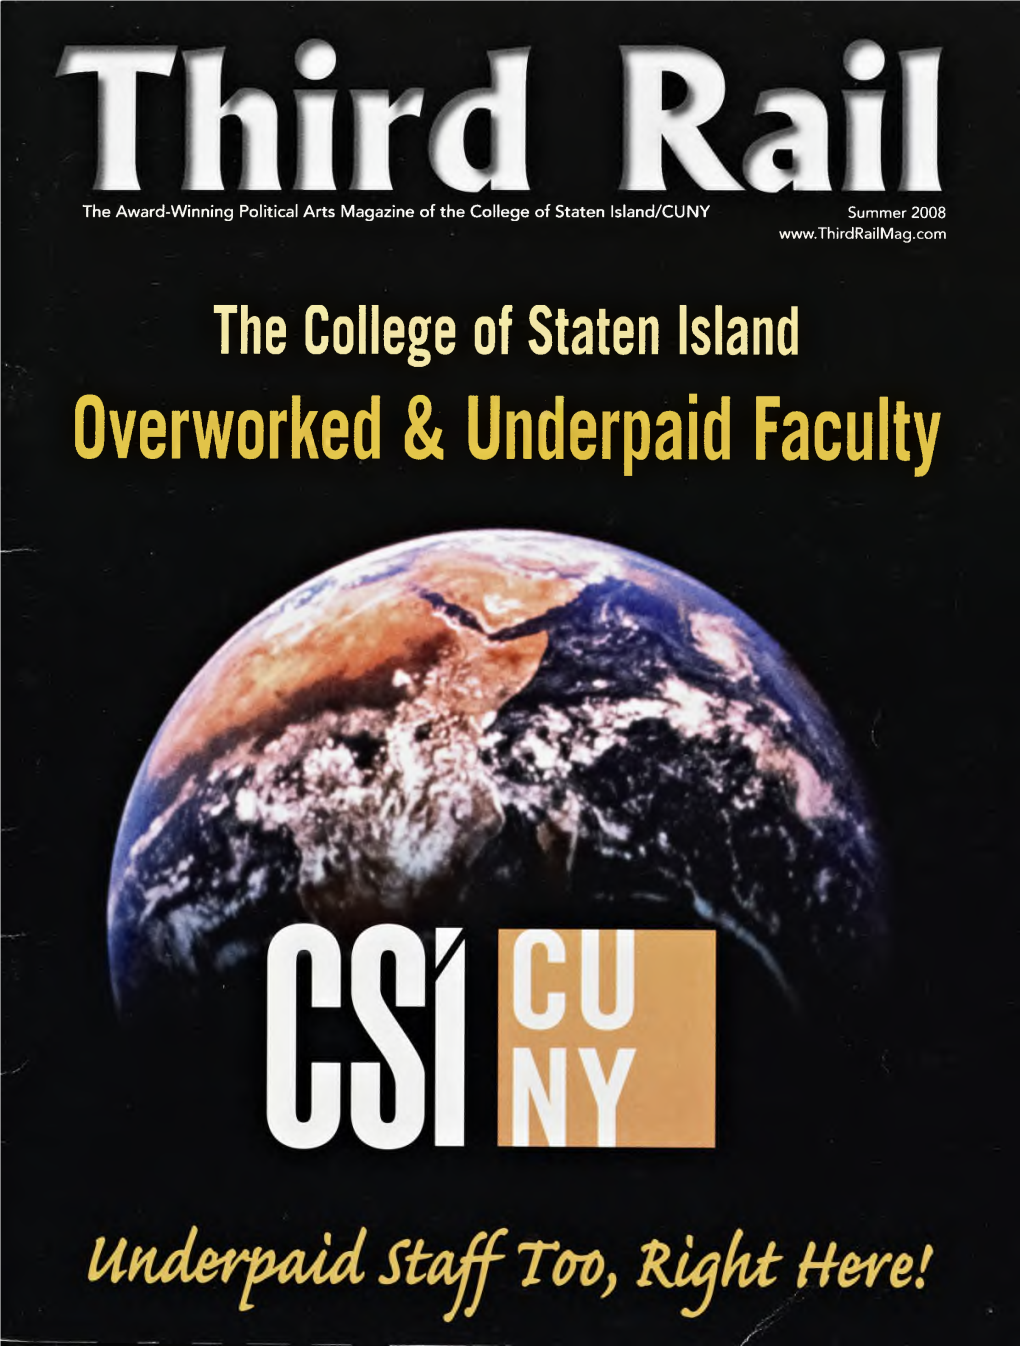 The College of Staten Island Overworked & Underpaid Faculty